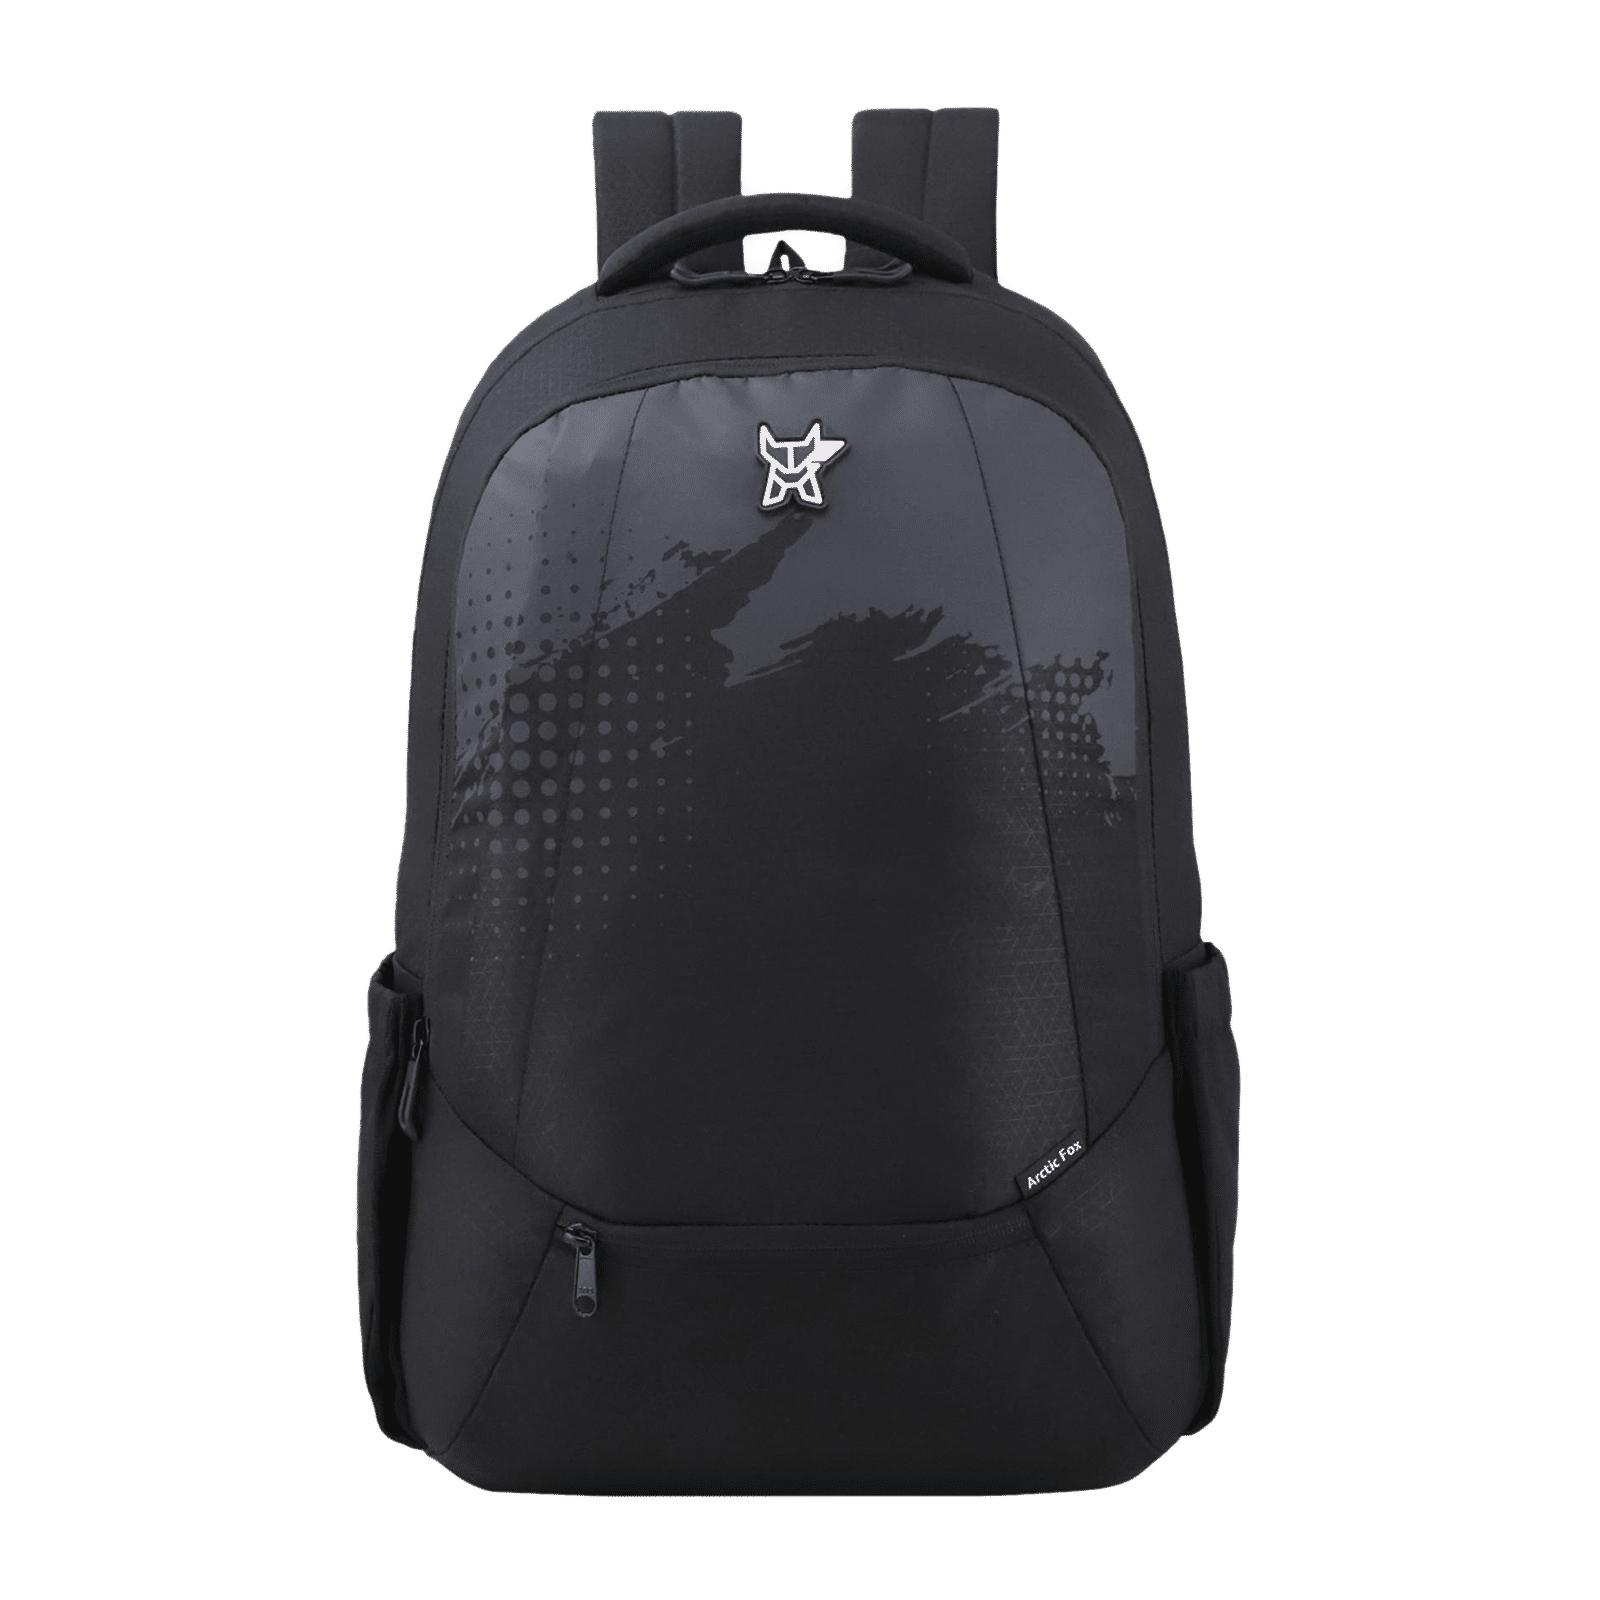 Wenger Bags & Luggage - Philippines - Our Swiss Gear backpacks come with  several features like padded shoulder straps, a padded laptop sleeve with  adjustable velcro straps, an airflow back system for